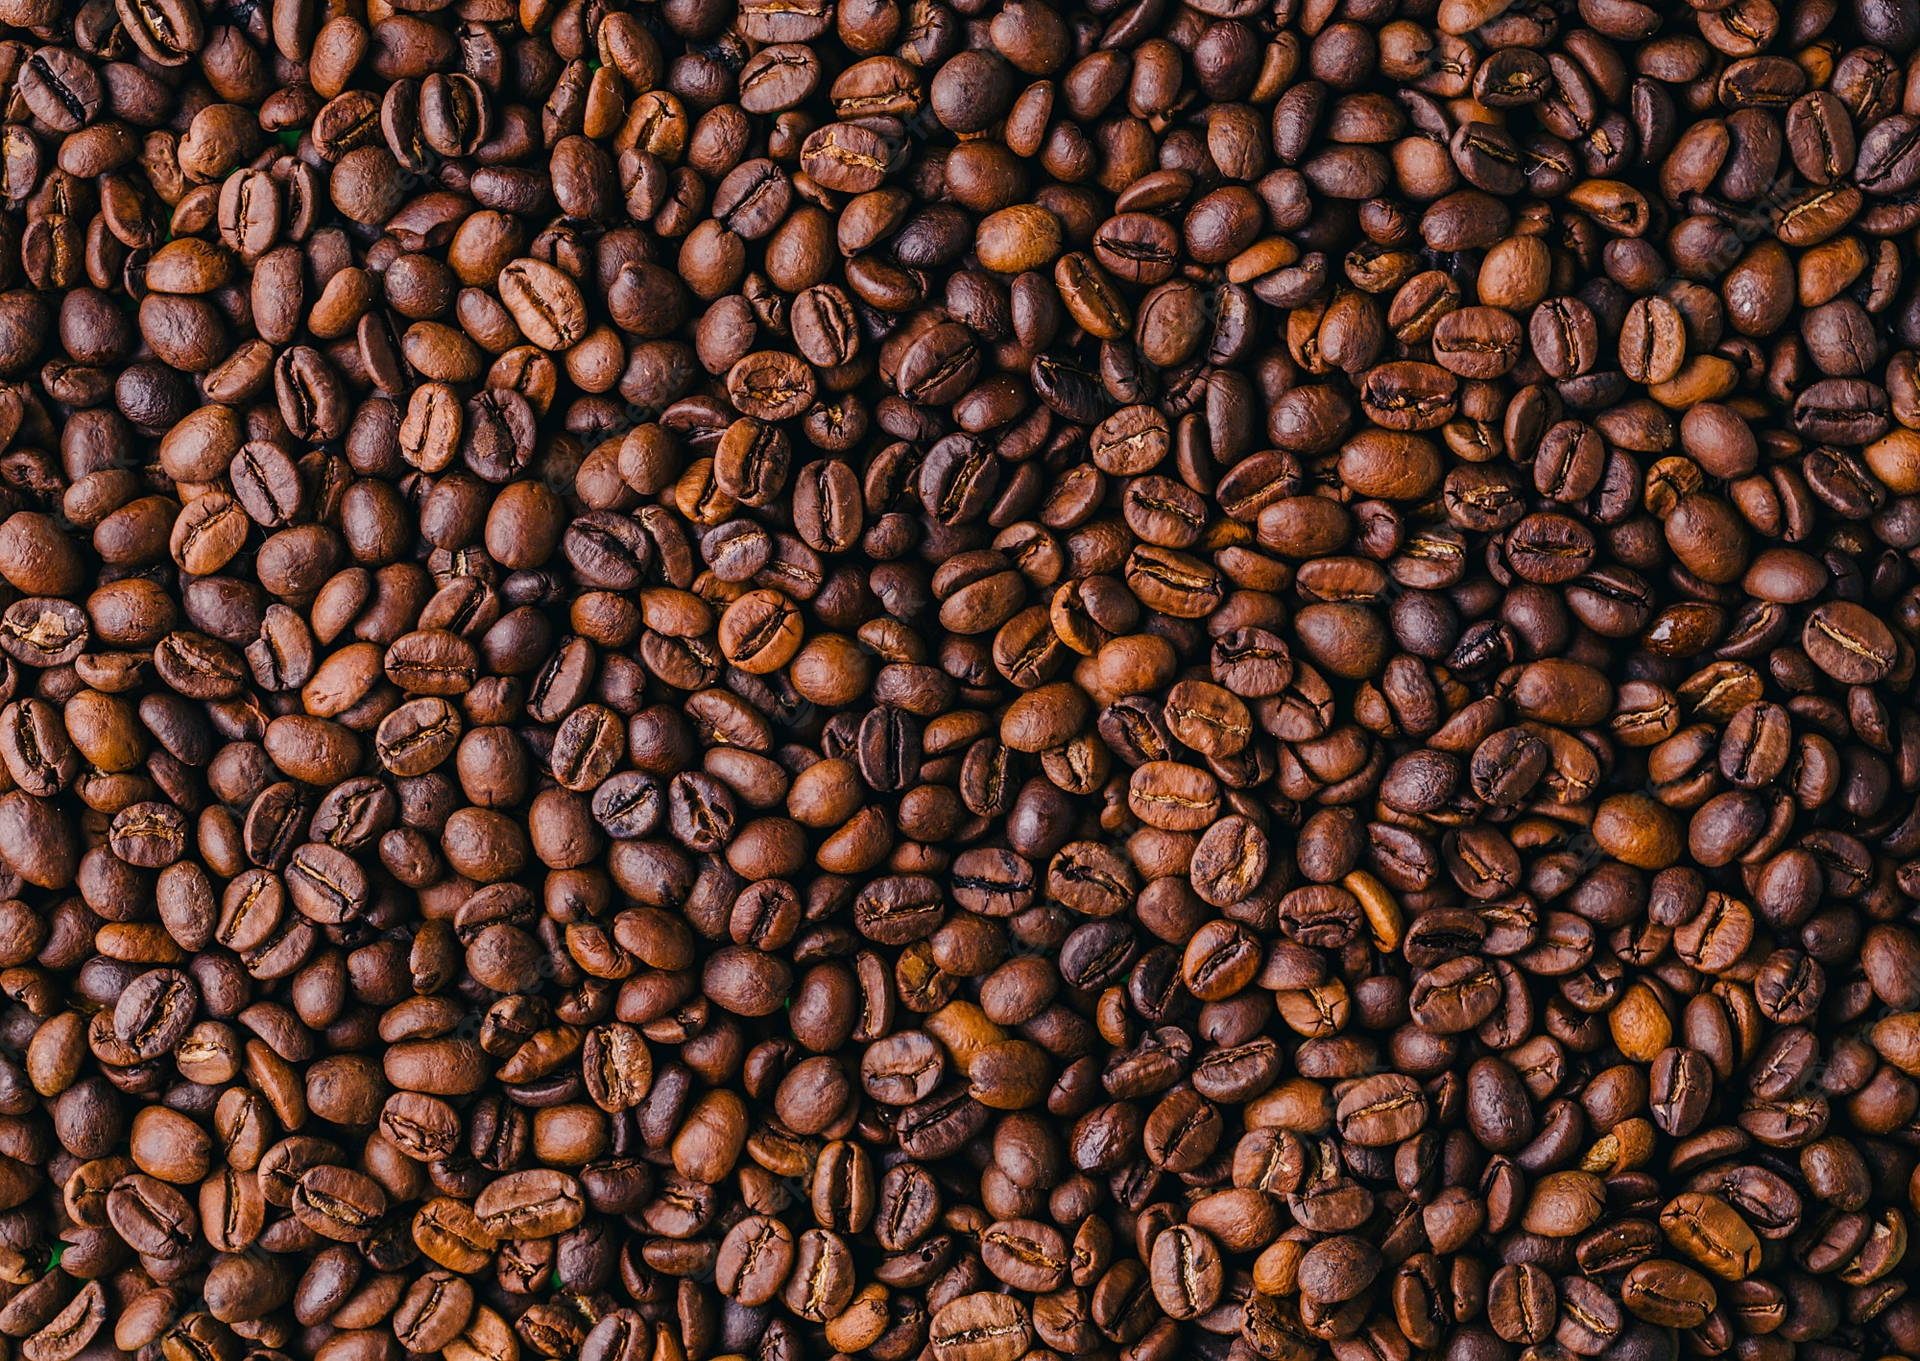 Large Area Of Coffee Beans Wallpaper